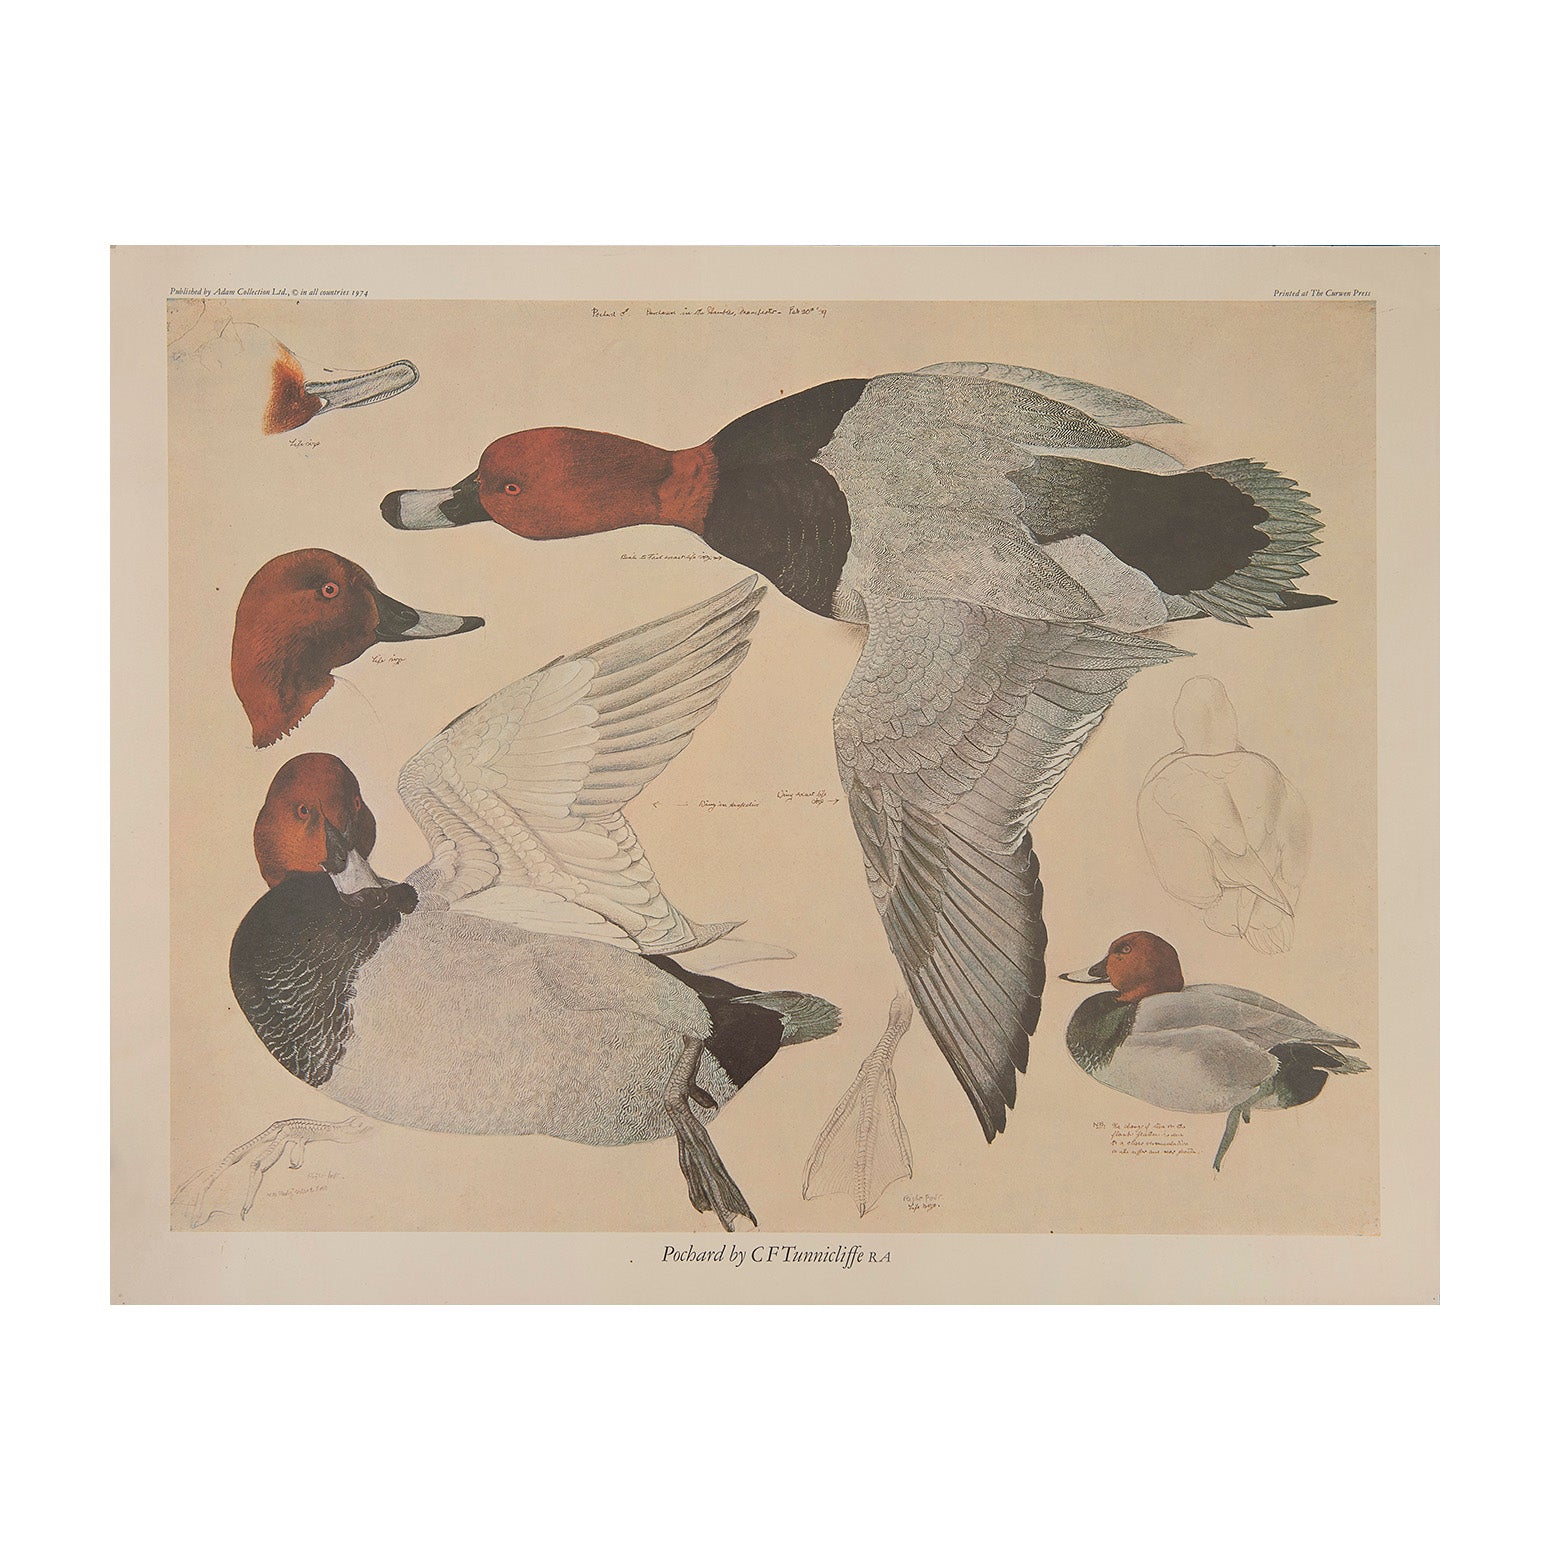 An original print, Pochard, by CF Tunnicliffe RA, printed by the Curwen Press and published by RA Adam Collections Ltd, 1974